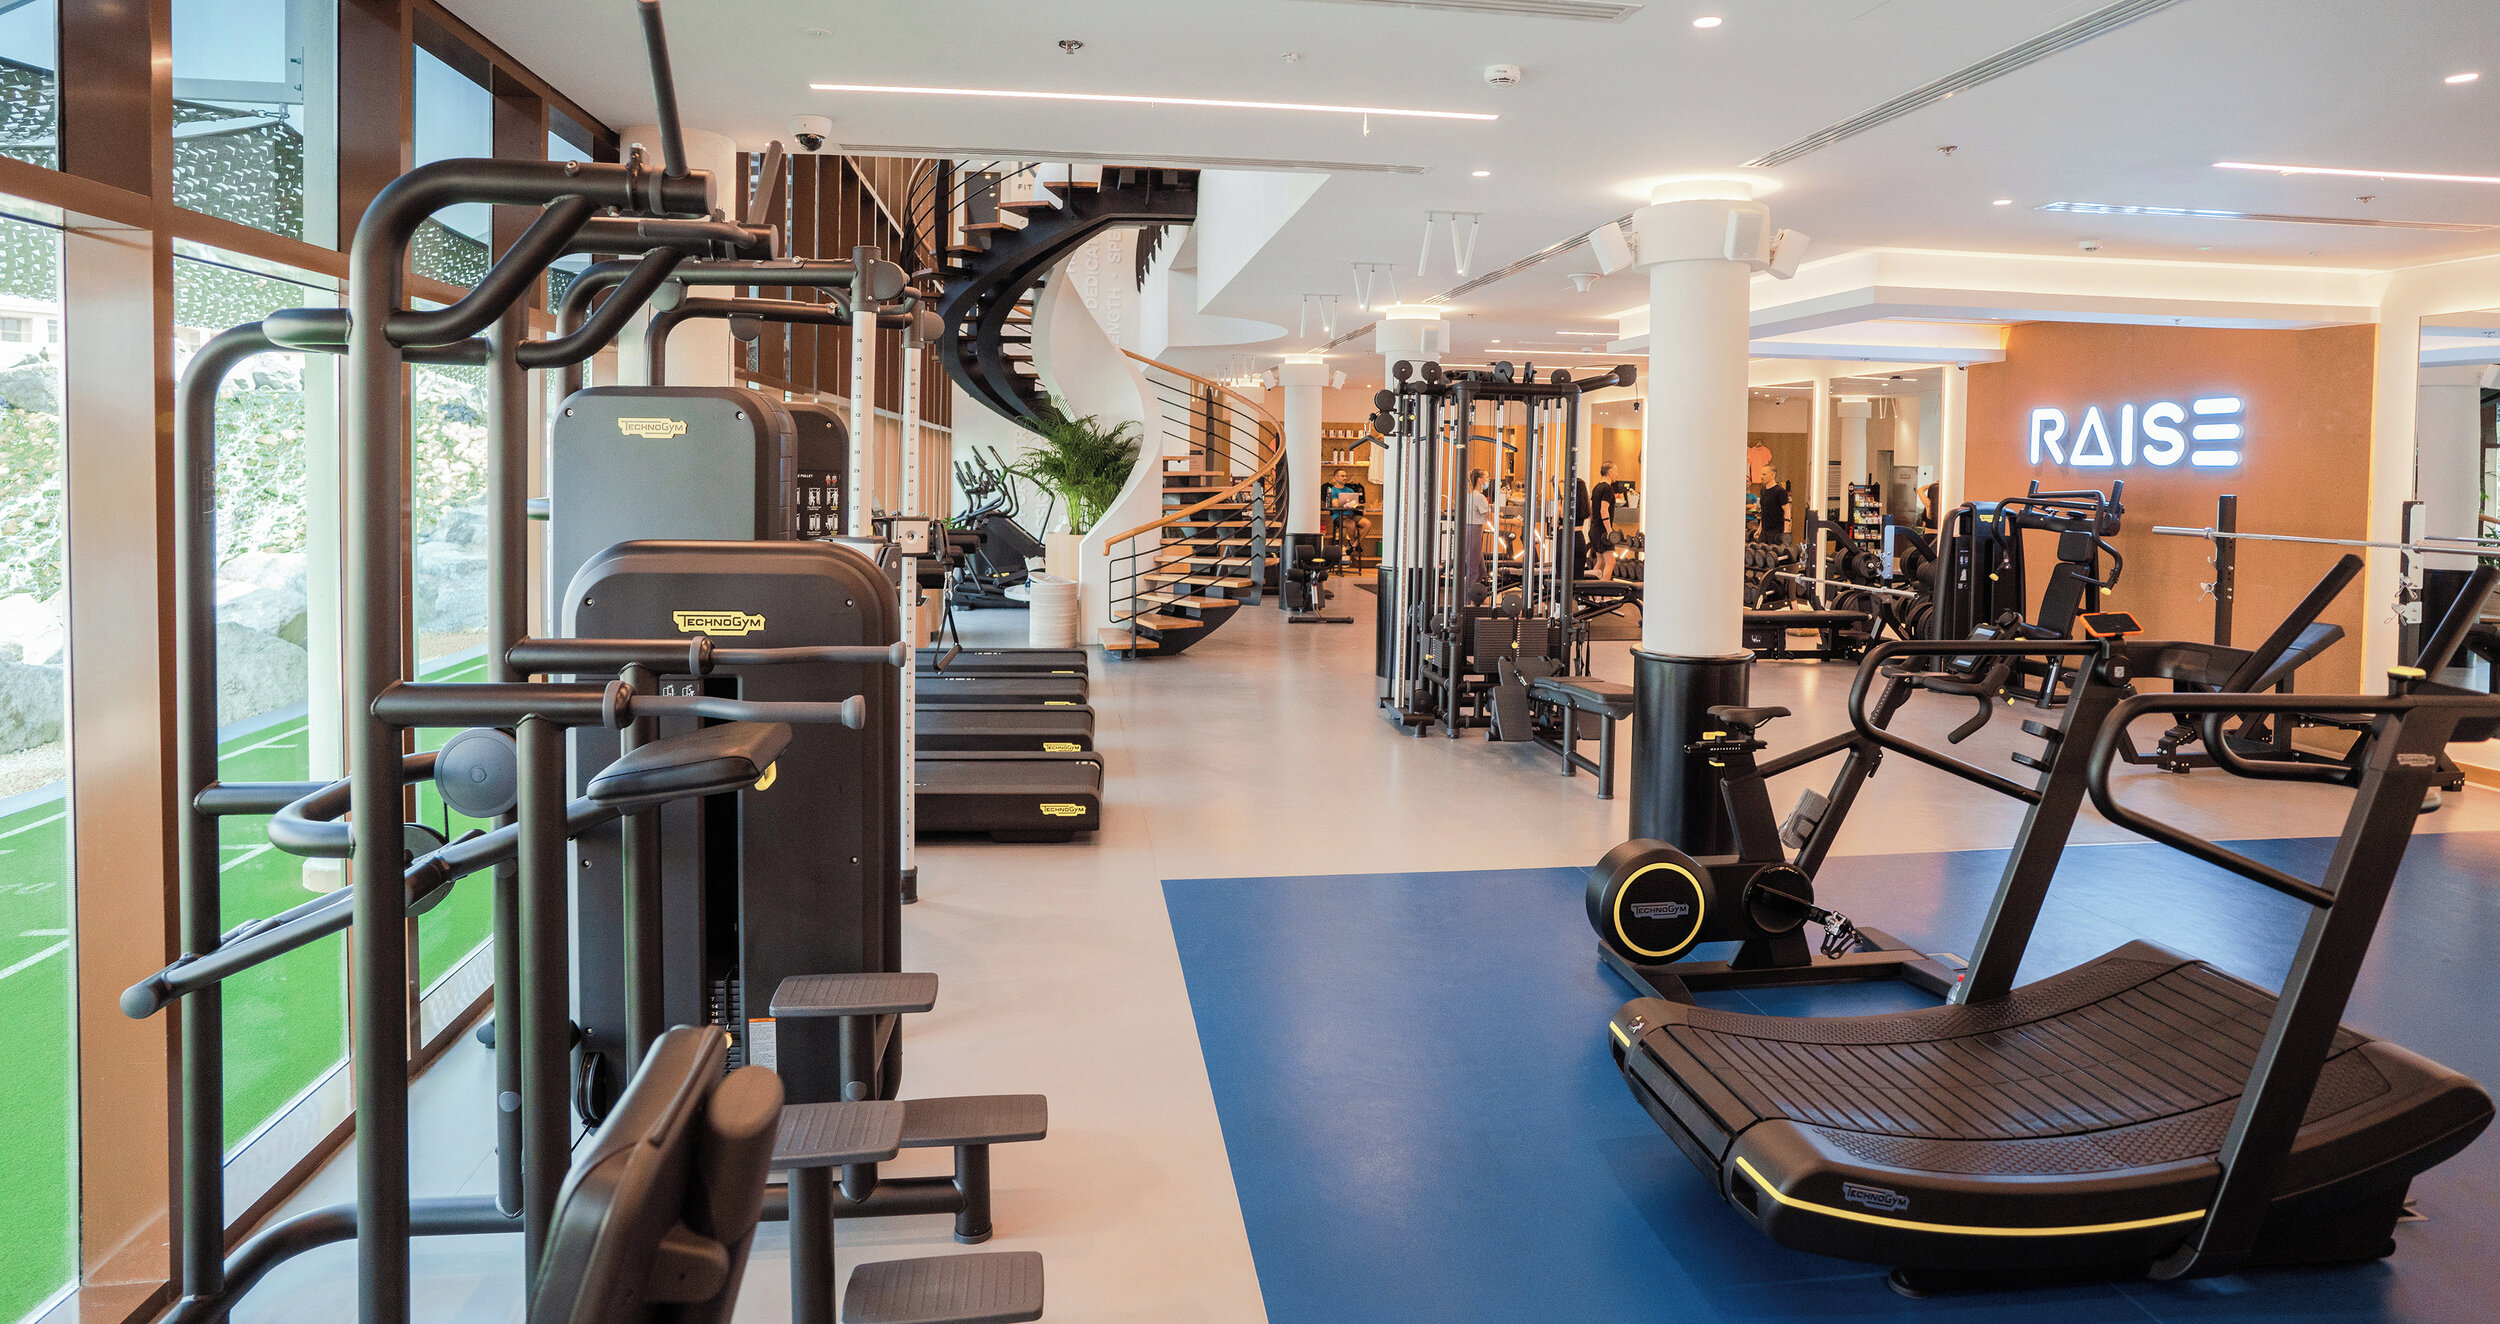 Daily classes, wellness consultants, PT sessions and nutrition recommendations are assets available to guide members in their FITNESS journey at @raisedubai.⁣
⁣
#RaiseYourFitness #RAISEDubai #JumeirahIslandsClubhouse #PTDubai #FItnessClasses #DubaiFi